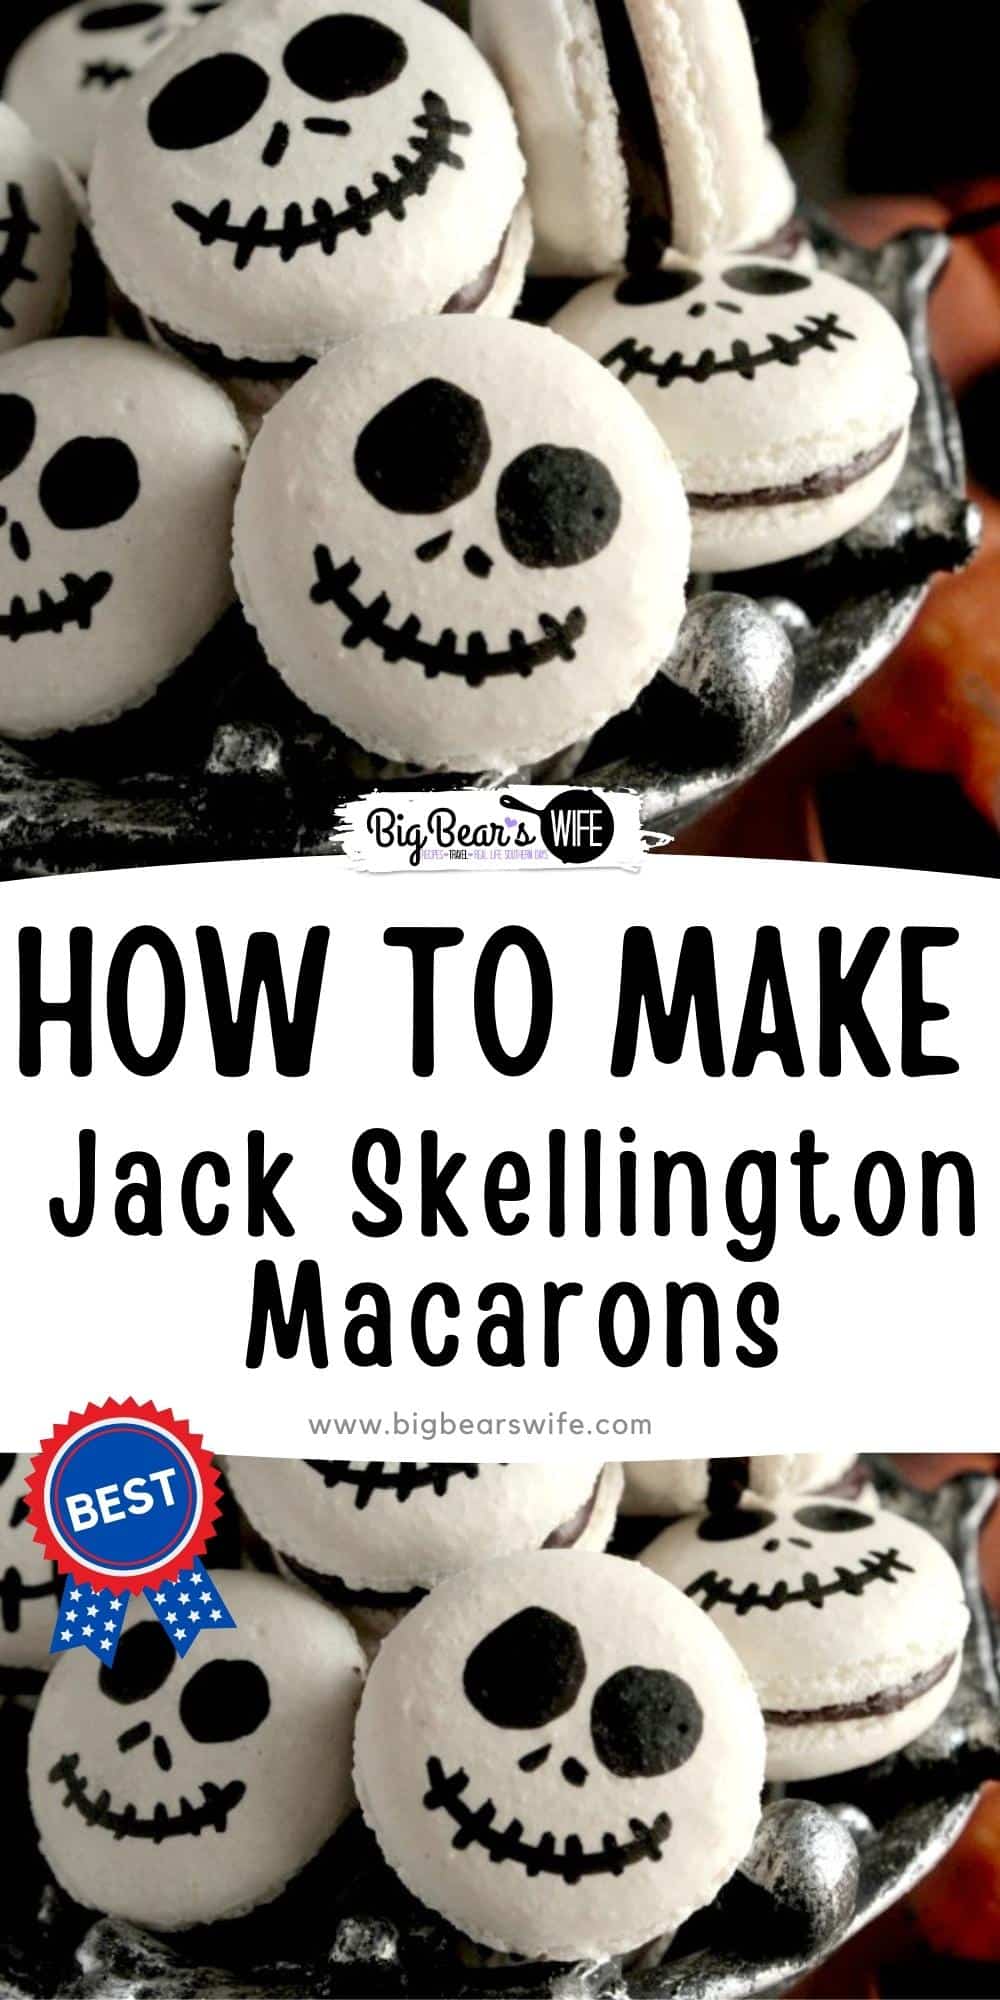 No need to be afraid of these Jack Skellington Macarons! The pumpkin king might try to act creepy but there is nothing scary about these sweet little treats! via @bigbearswife